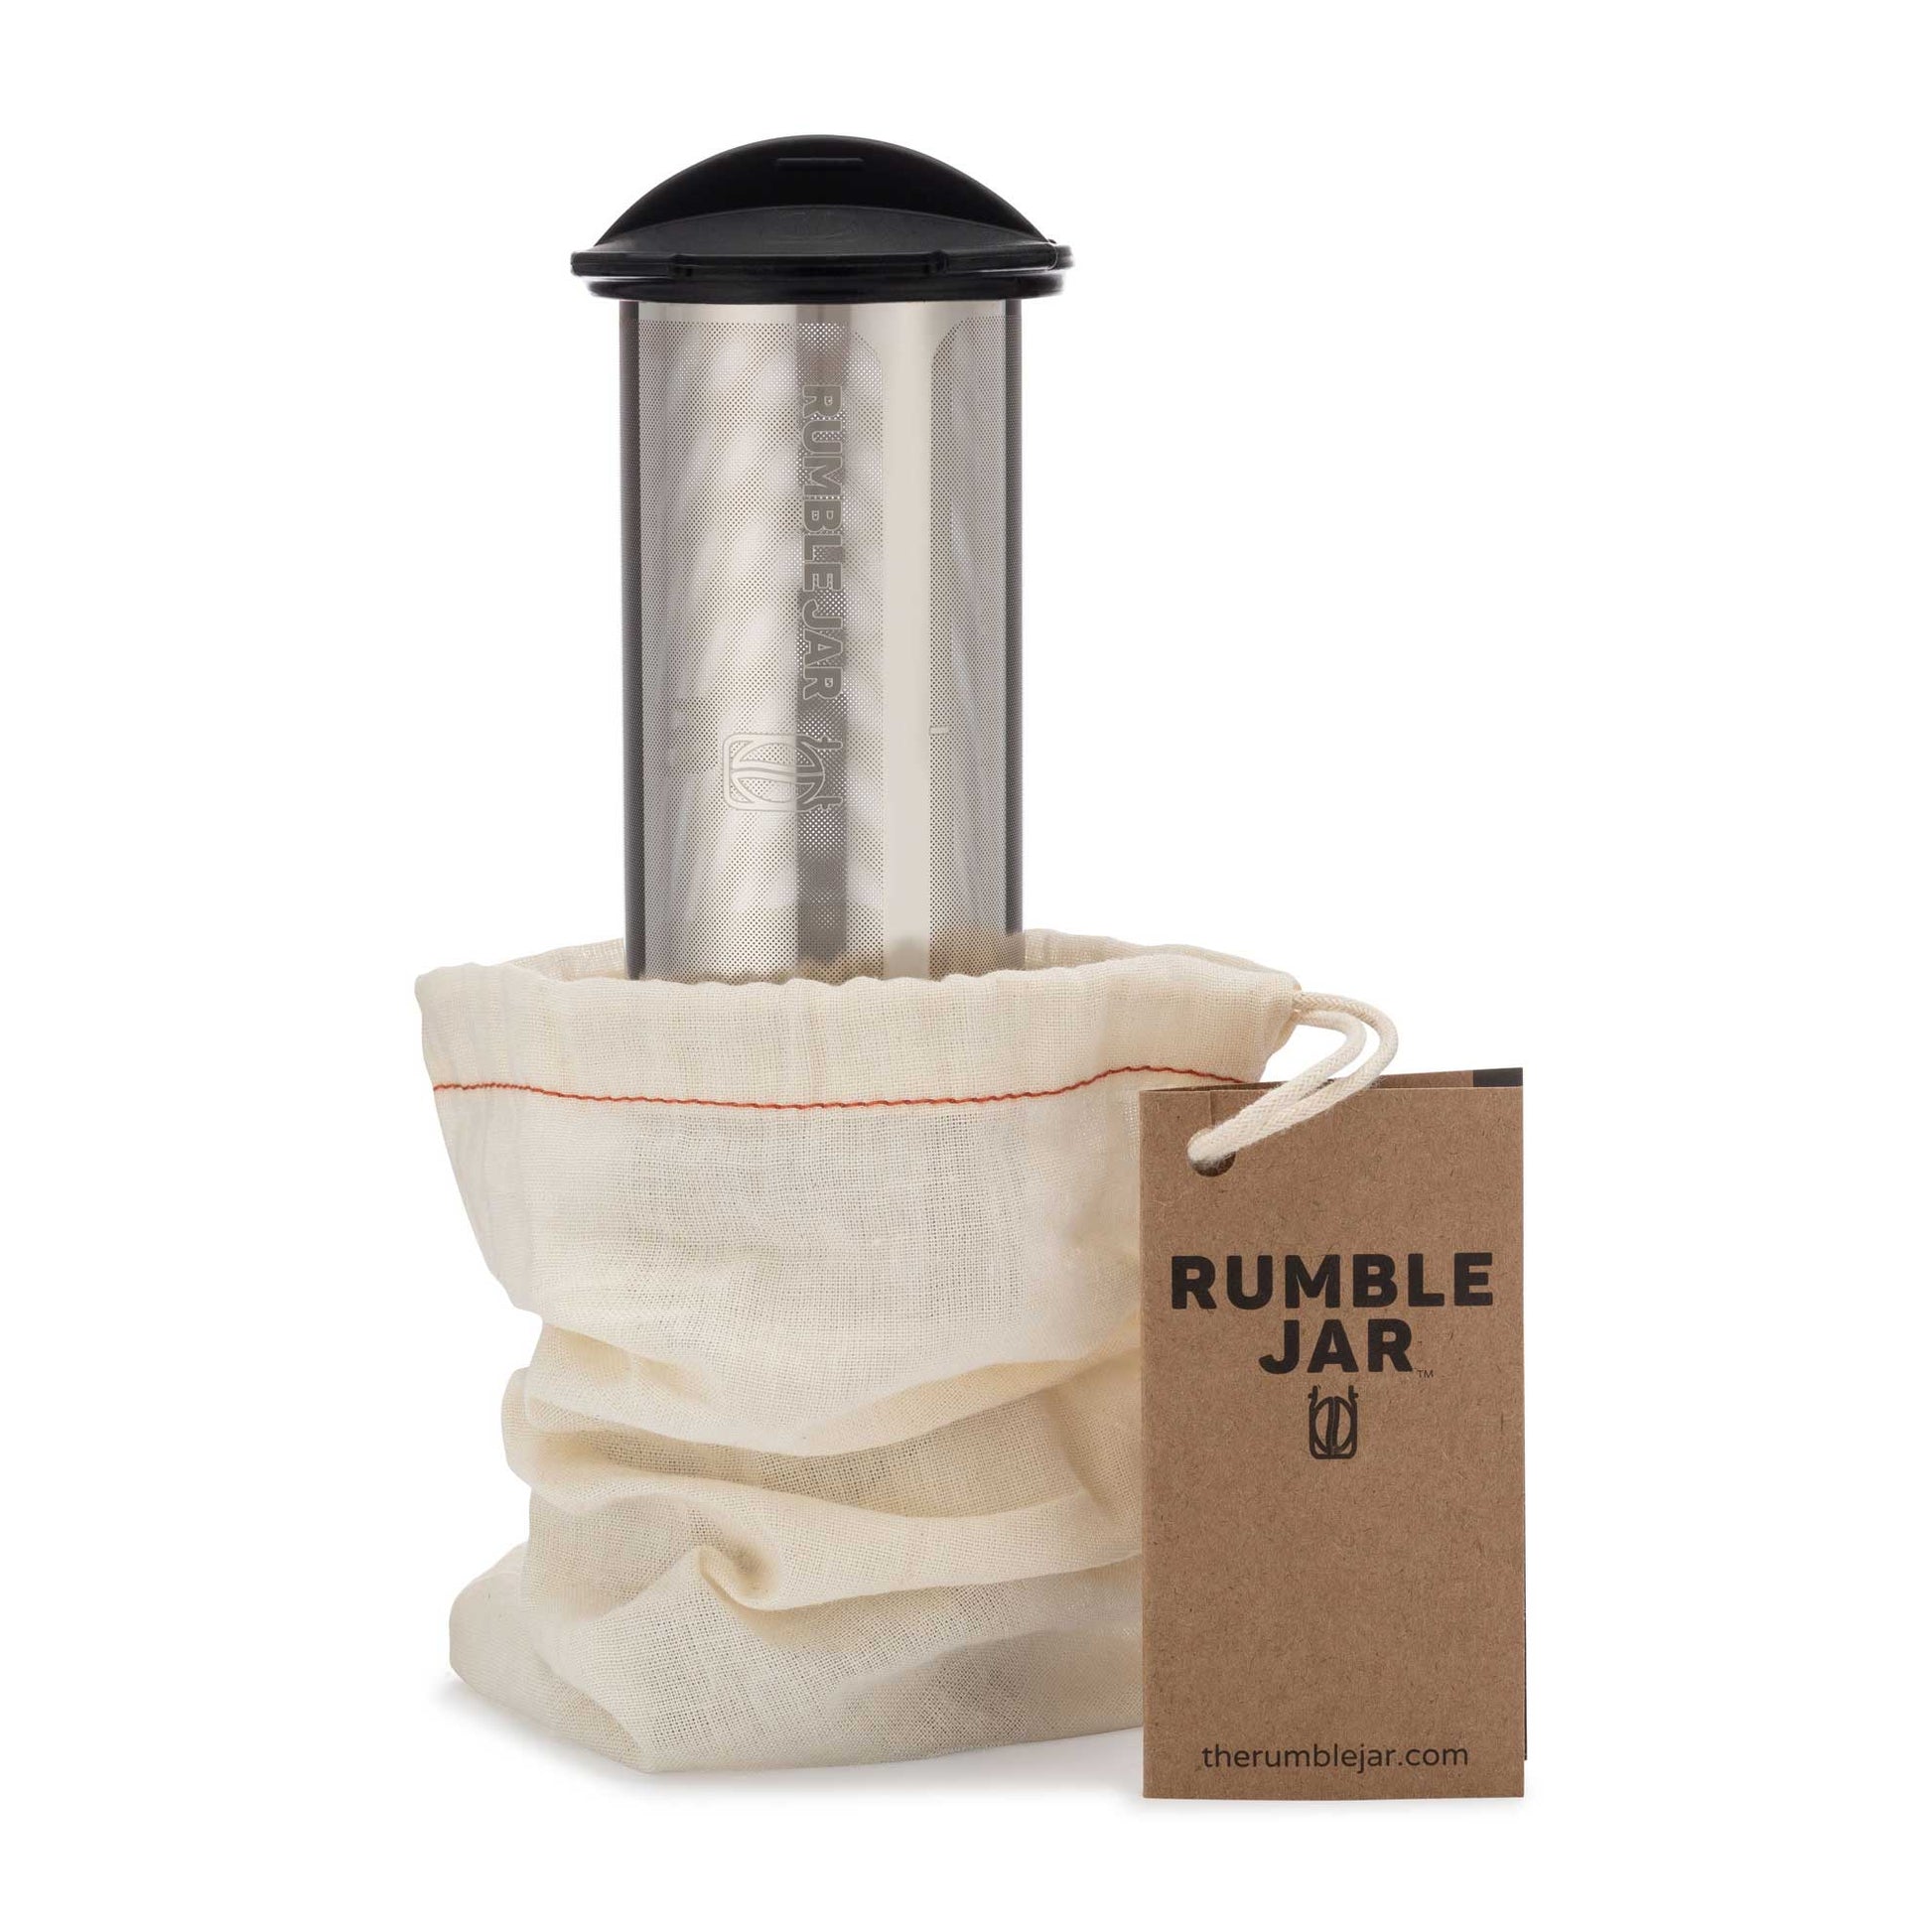 Rumble Jar just doubled in size